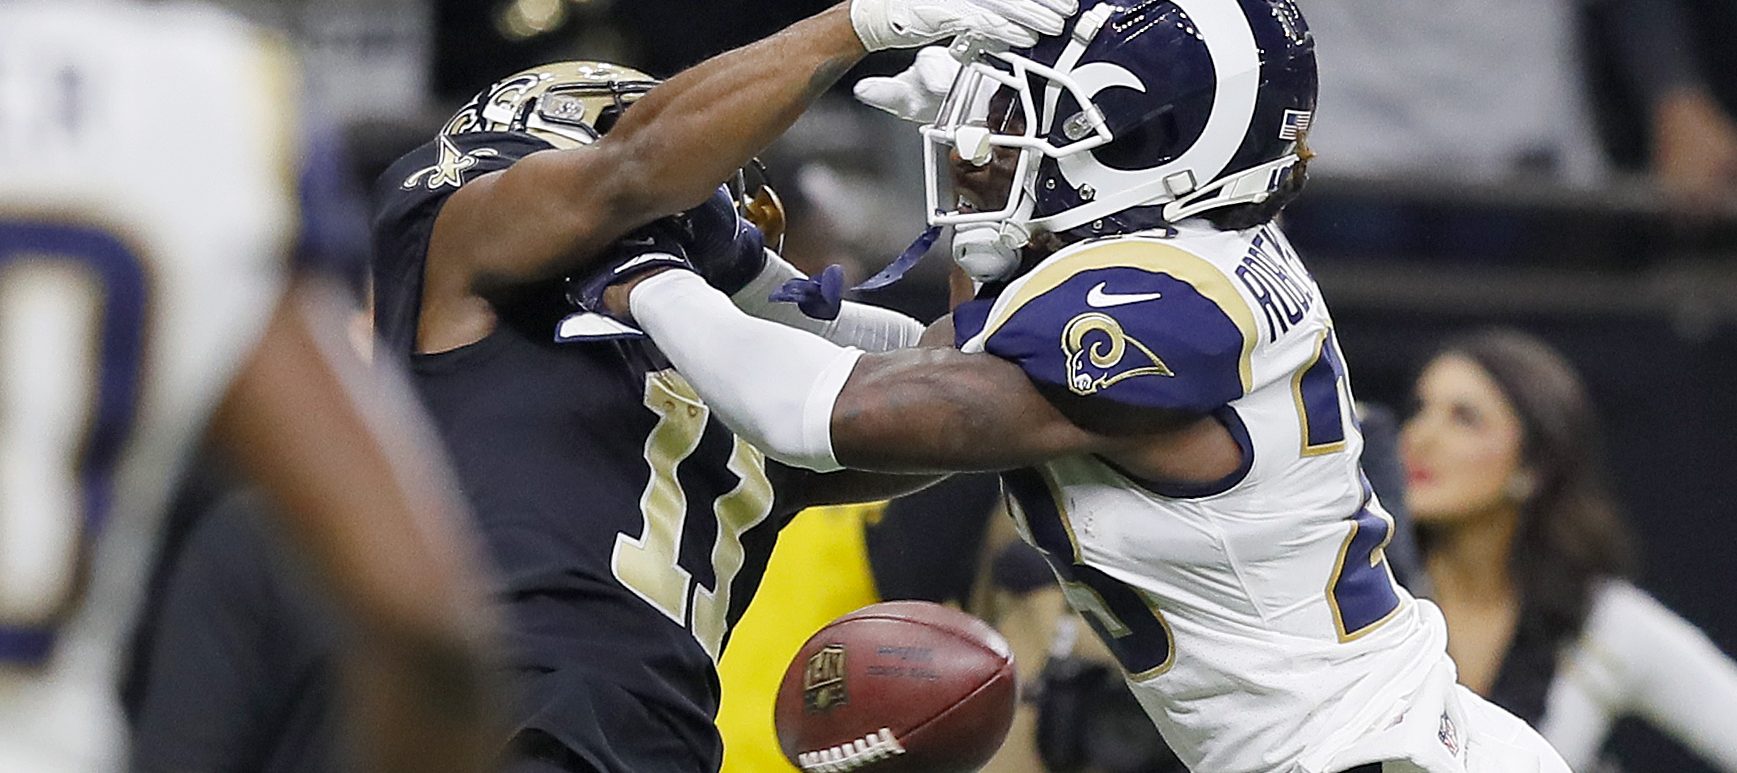 Tommylee Lewis #11 of the New Orleans Saints drops a pass broken up by Nickell Robey-Coleman #23 of the Los Angeles Rams during the fourth quarter in the NFC Championship game at the Mercedes-Benz Superdome on January 20, 2019 in New Orleans, Louisiana. (Photo by Kevin C.  Cox/Getty Images)